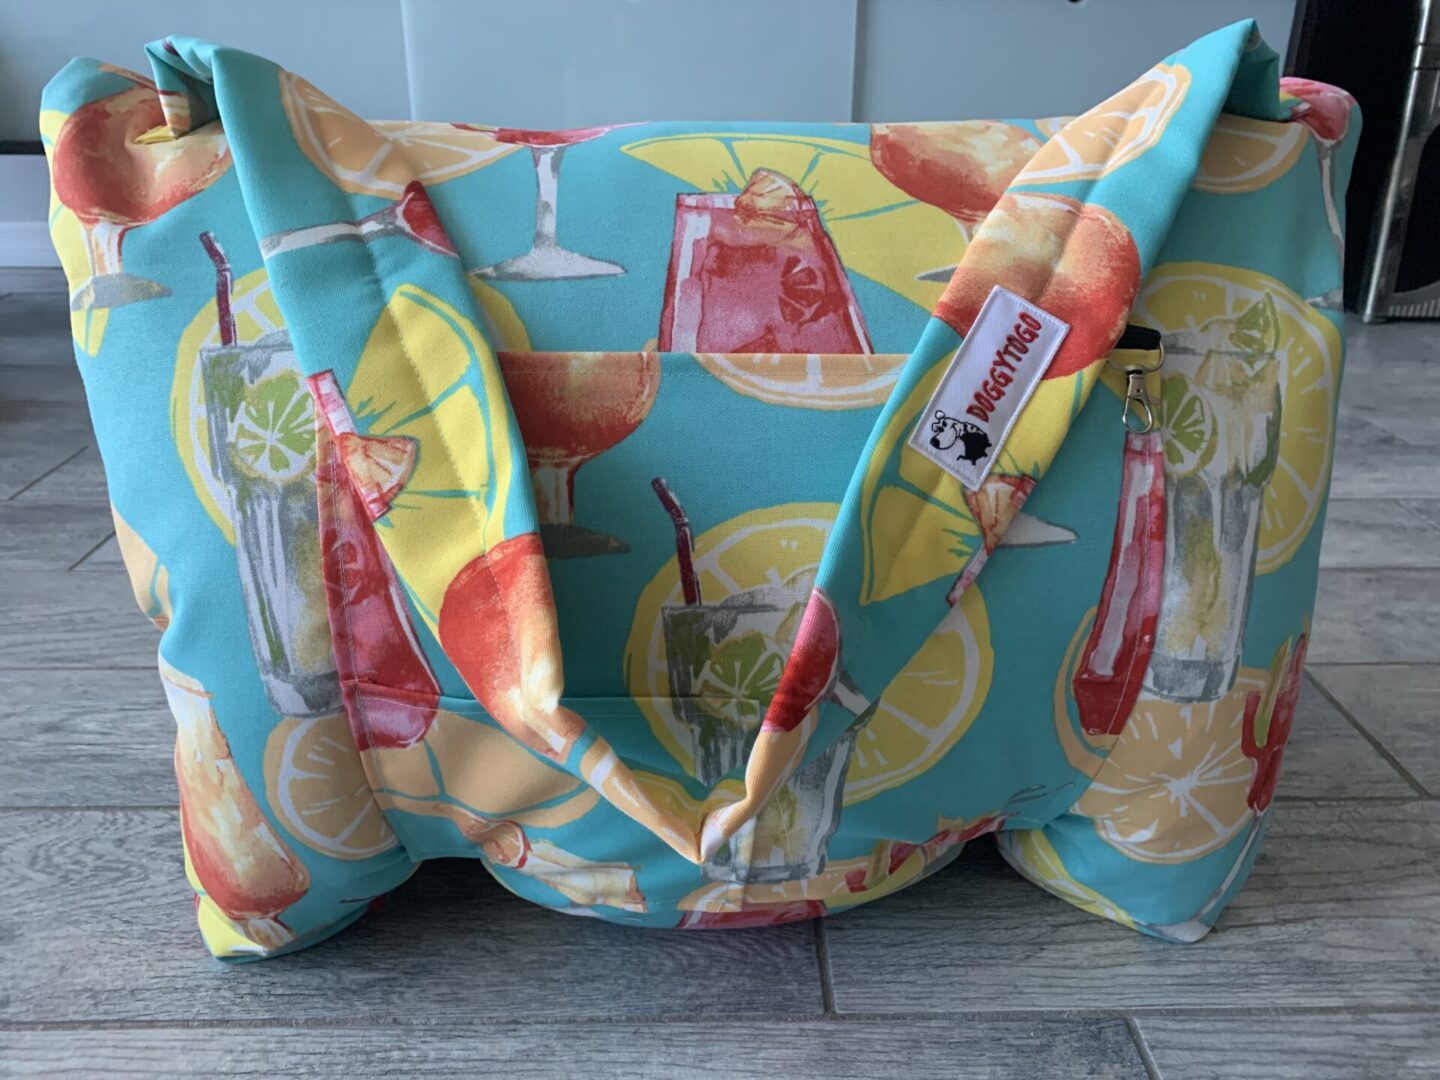 A dog bed bag with blue, yellow, and red color patterns